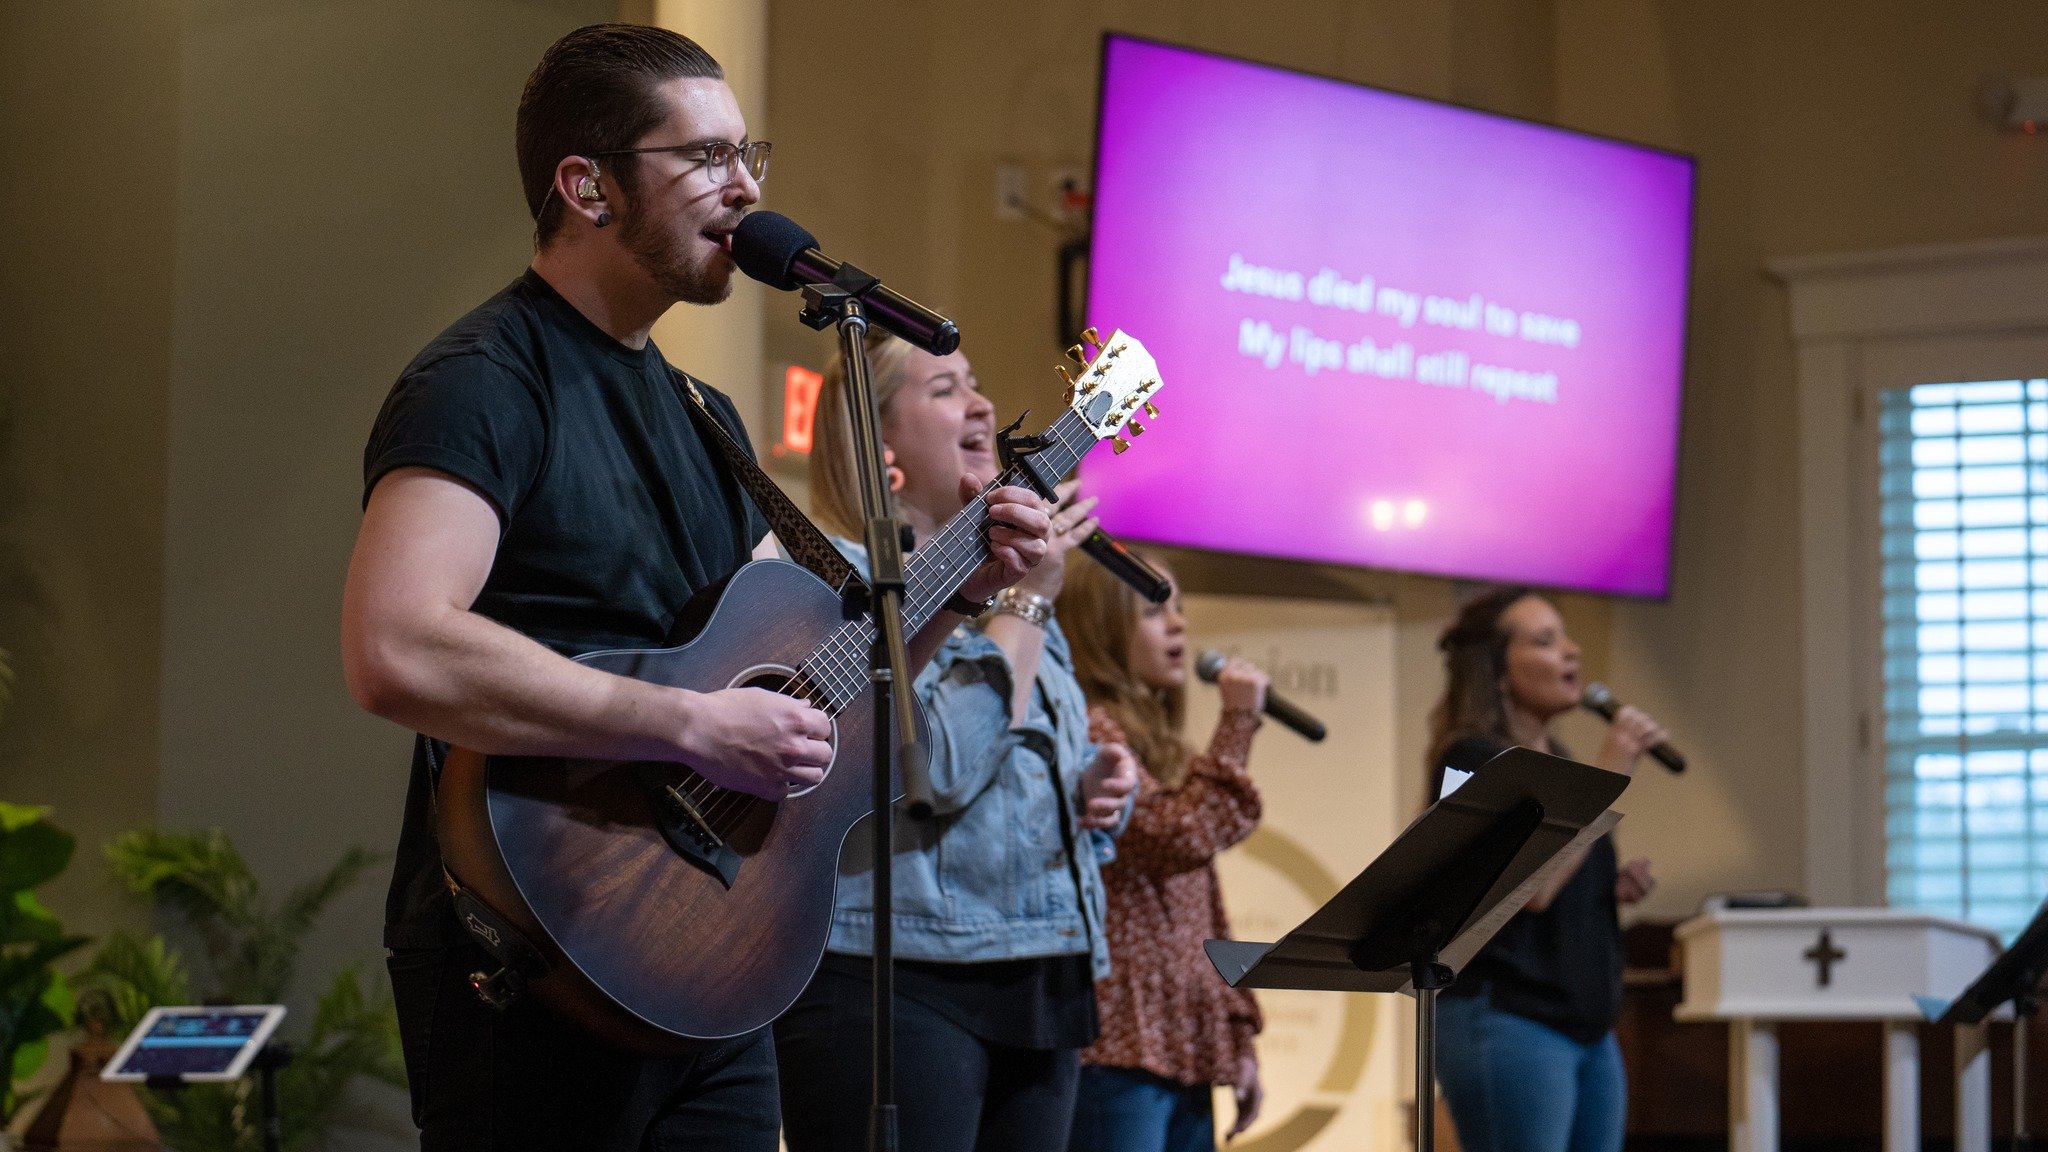 We can't wait to worship with you on Sunday! Did you know you can listen to songs we sing on Sundays from our Spotify Playlist? 

https://open.spotify.com/playlist/5awE3gkQ8QaxUa5HAdUiMn?si=11733076a028419d